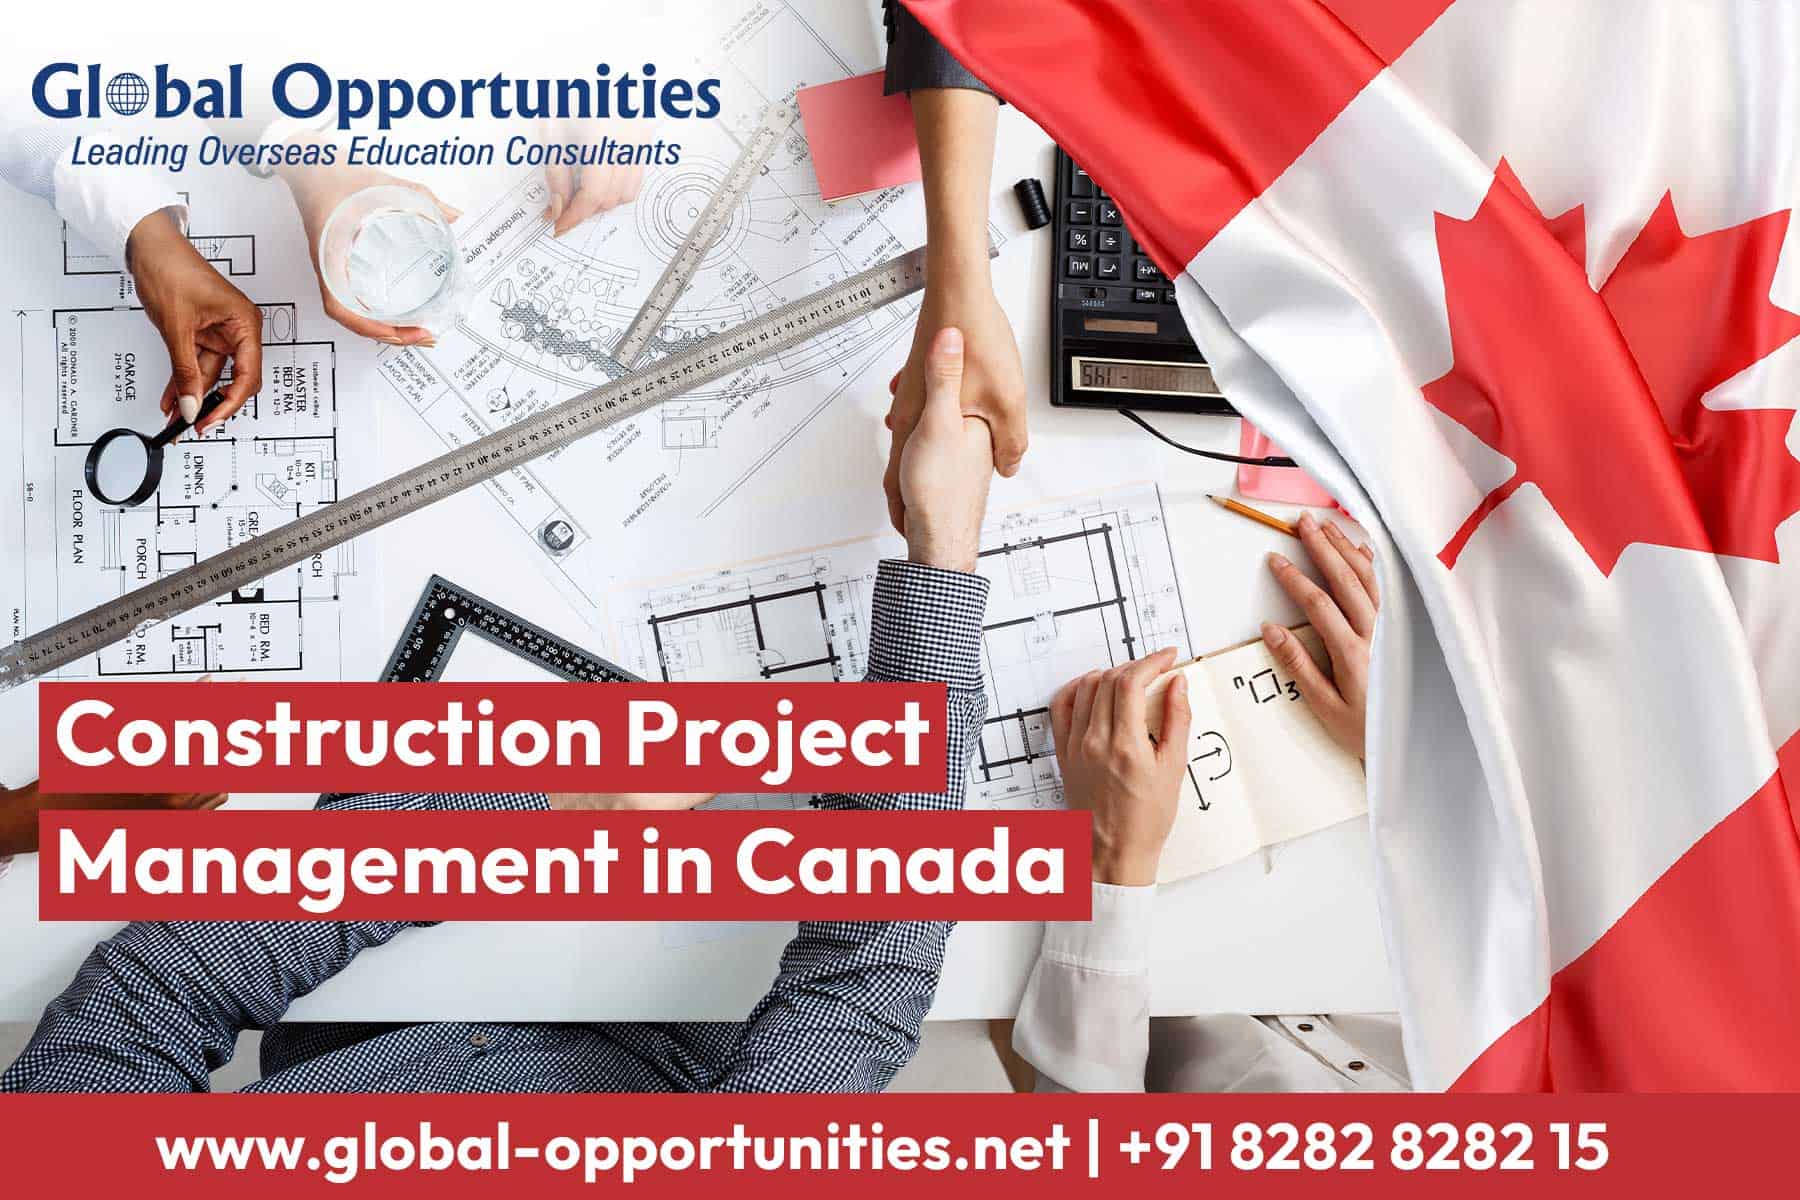 Construction Project Management in Canada